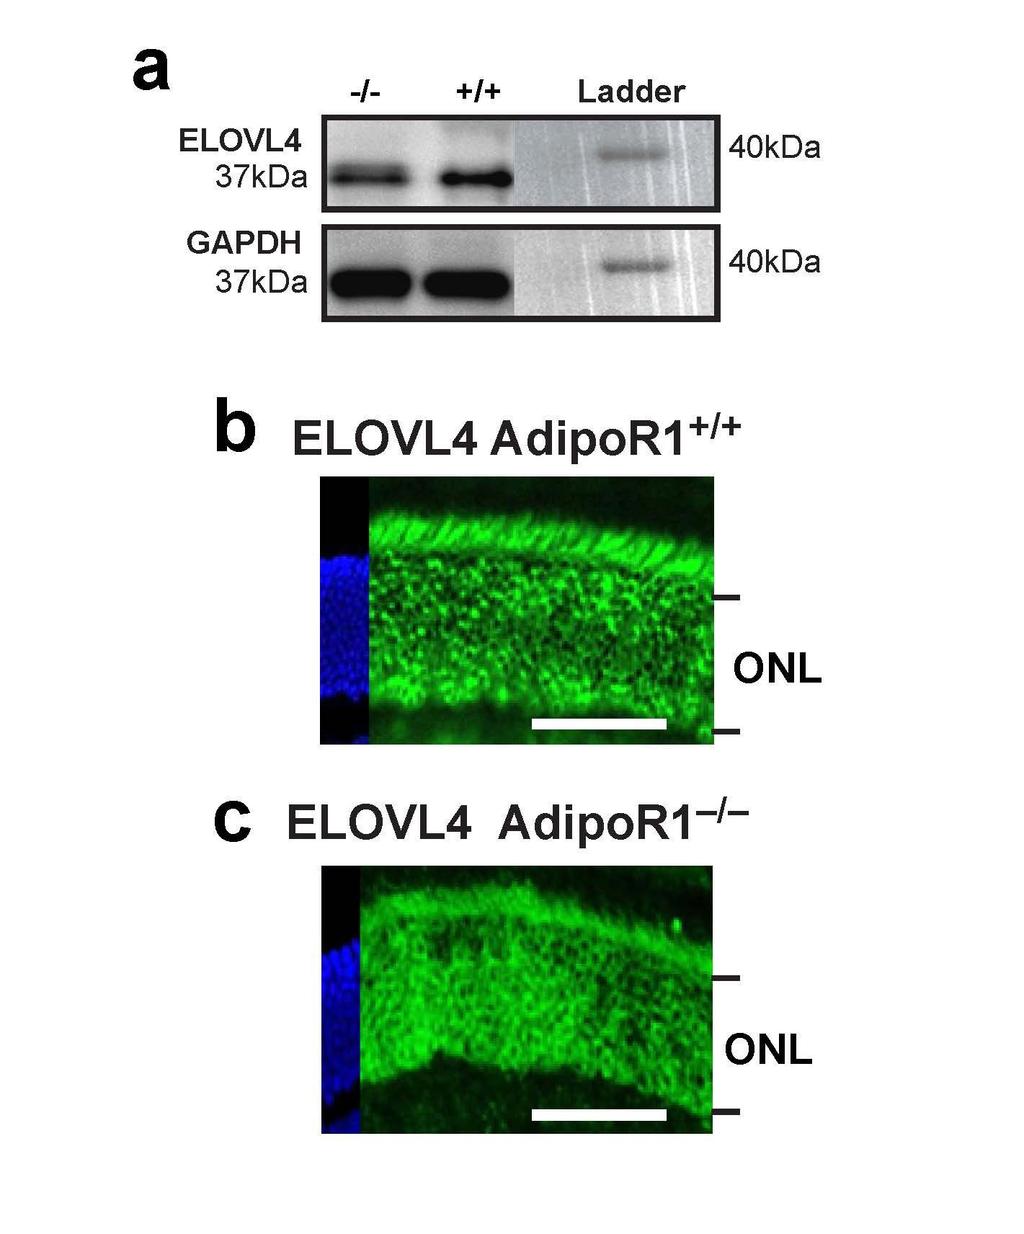 Supplementary Figure 2. ELOVL4 is not down-regulated in AdipoR1 -/- retinas. (a) Western blot demonstrating no significant difference in ELOVL4 concentration between AdipoR1 +/+ and -/- retinas.